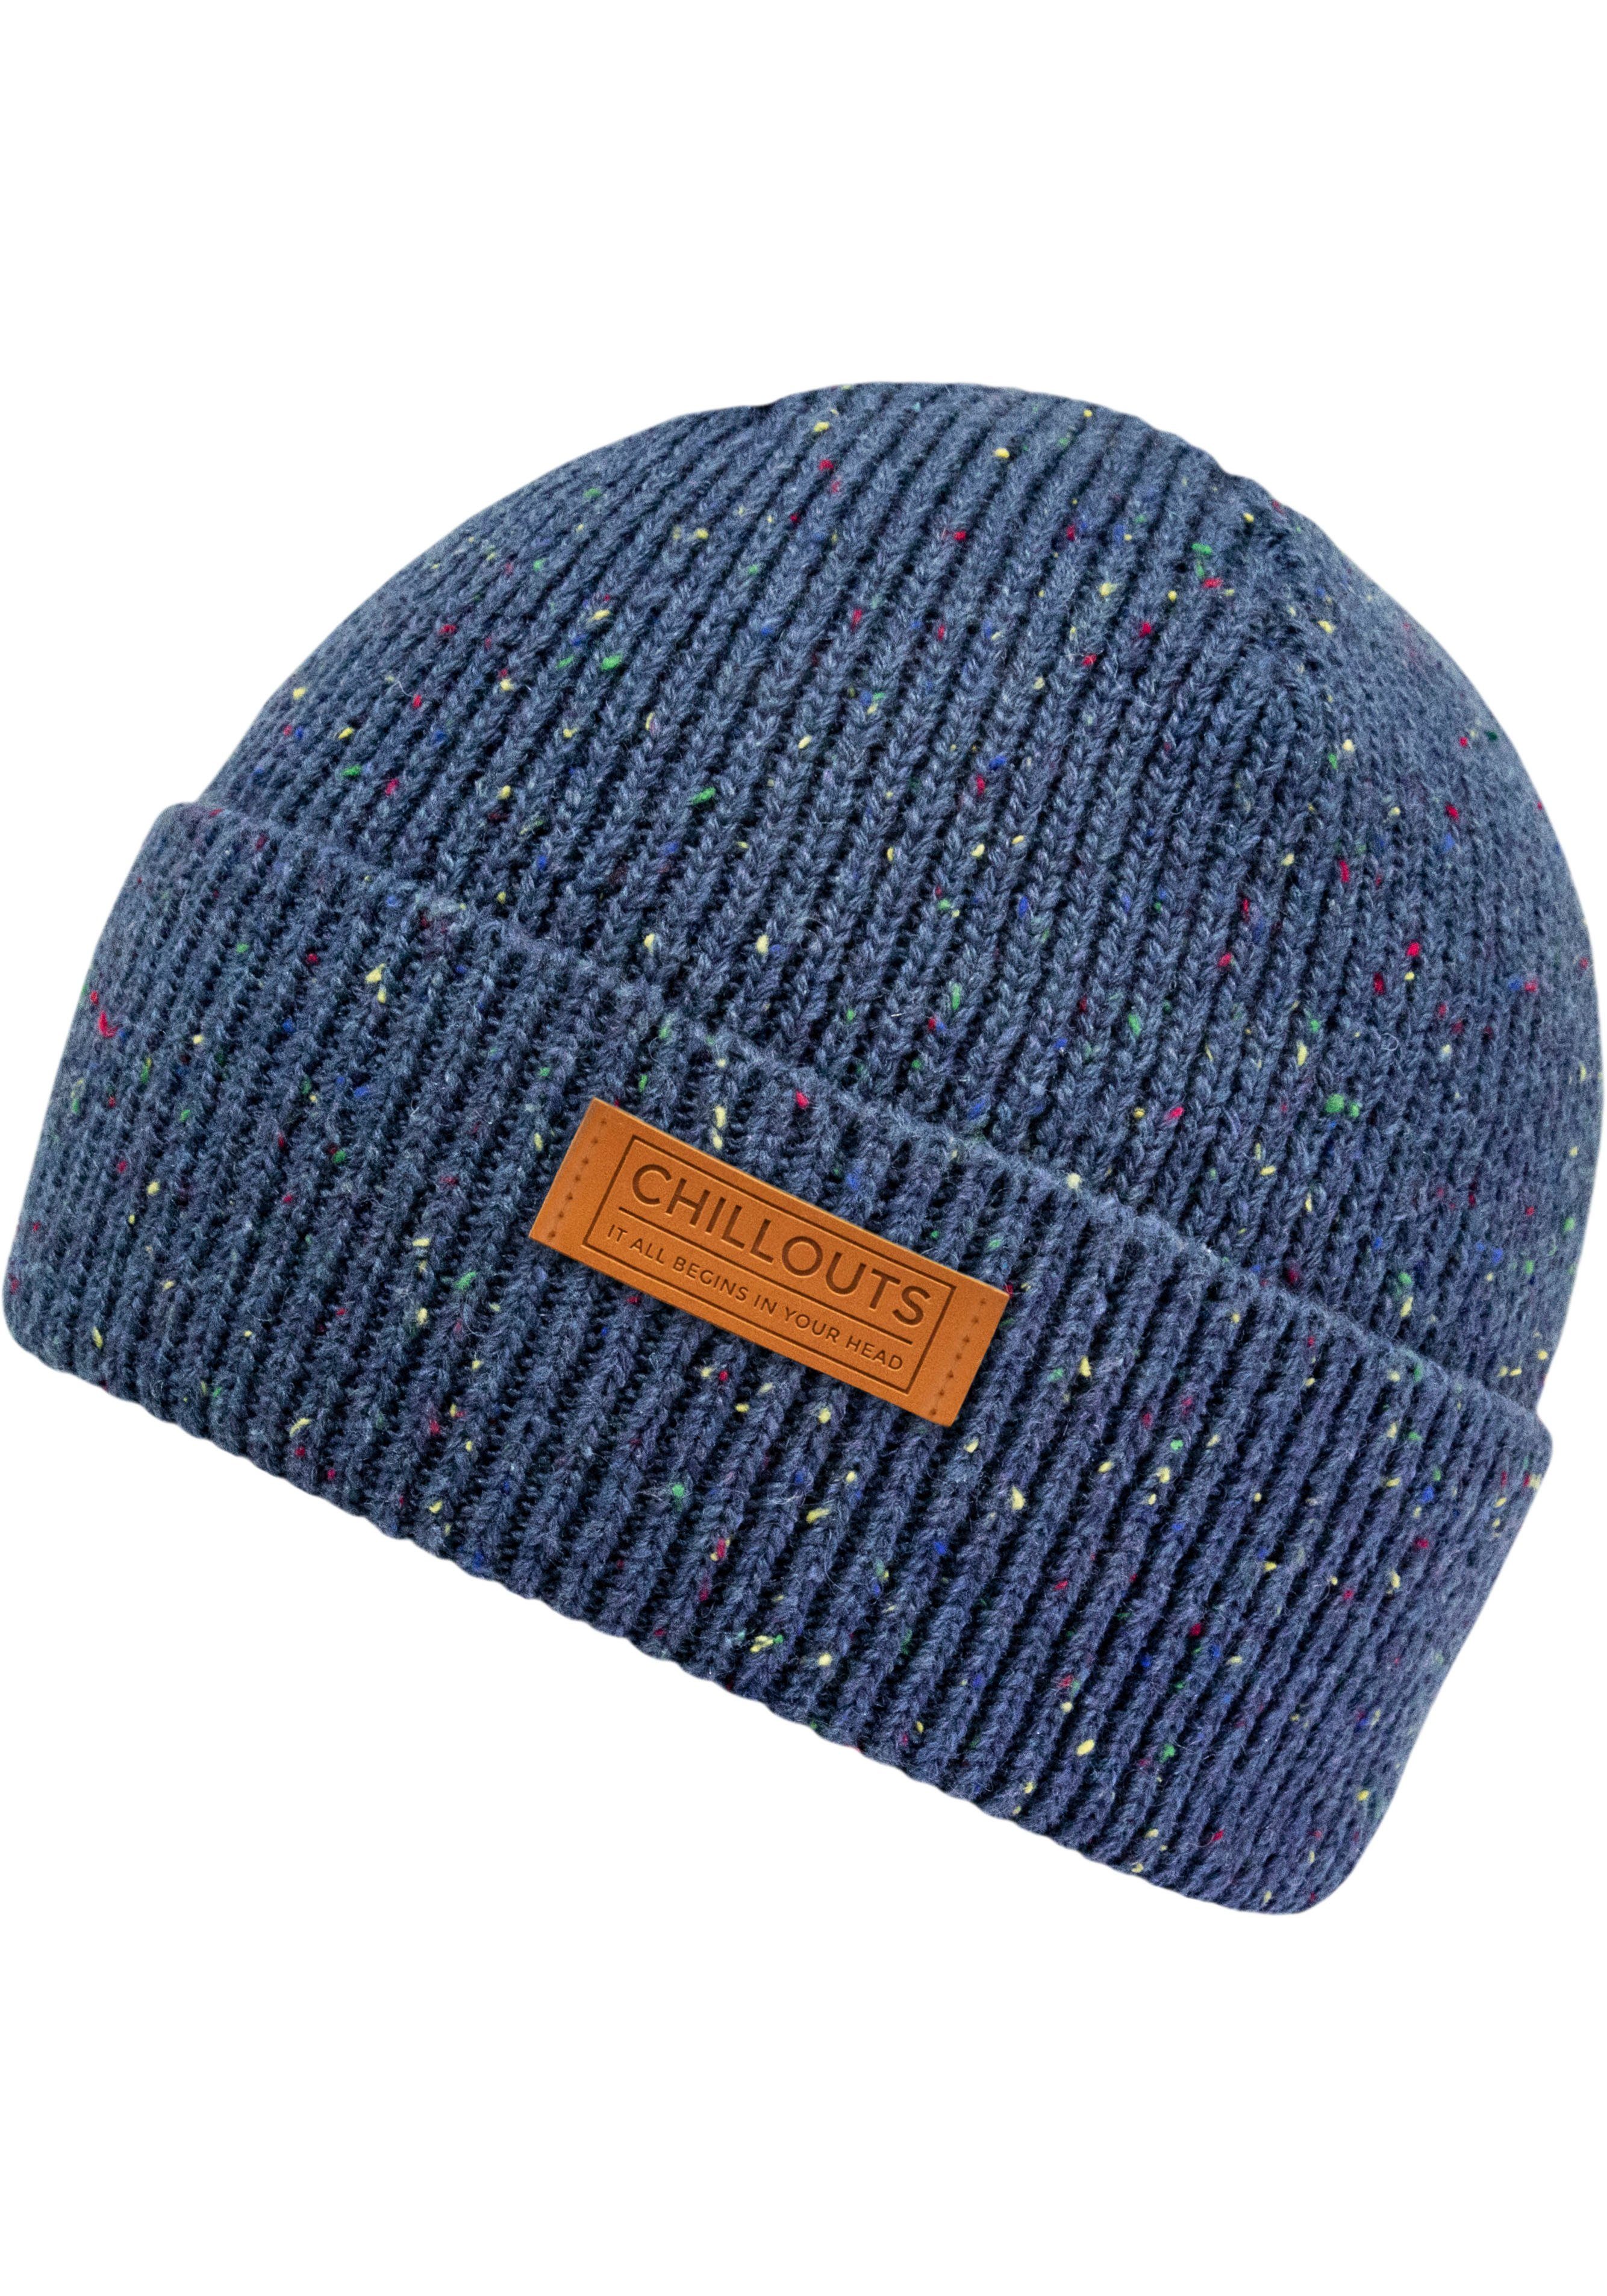 Top-App chillouts Strickmütze Brody Hat blue